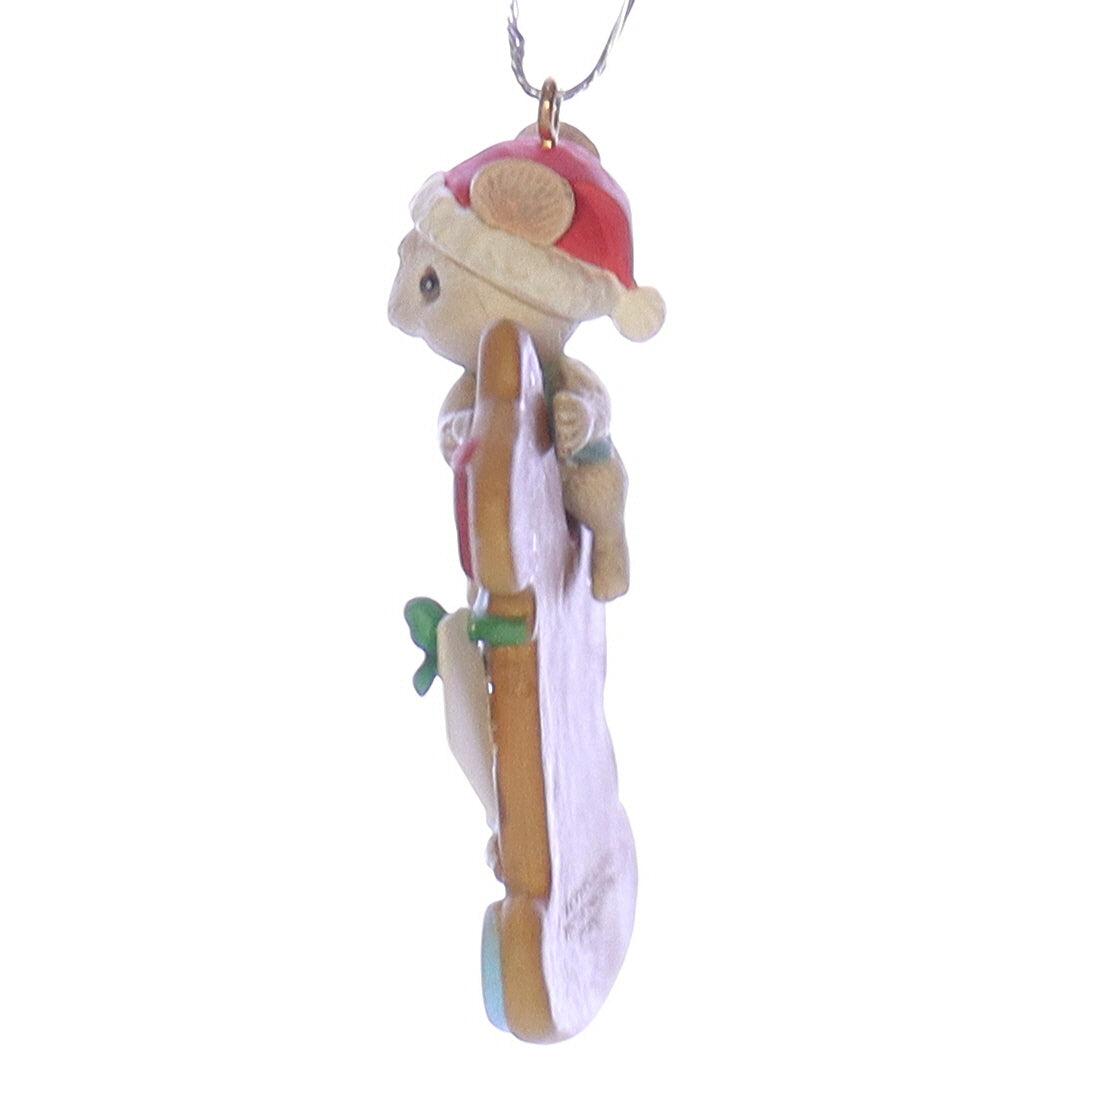 Enesco_Treasury_of_Christmas_Ornaments_8315814_Gingerbread_Greetings_Mouse_Ornament_1992 Left Side View